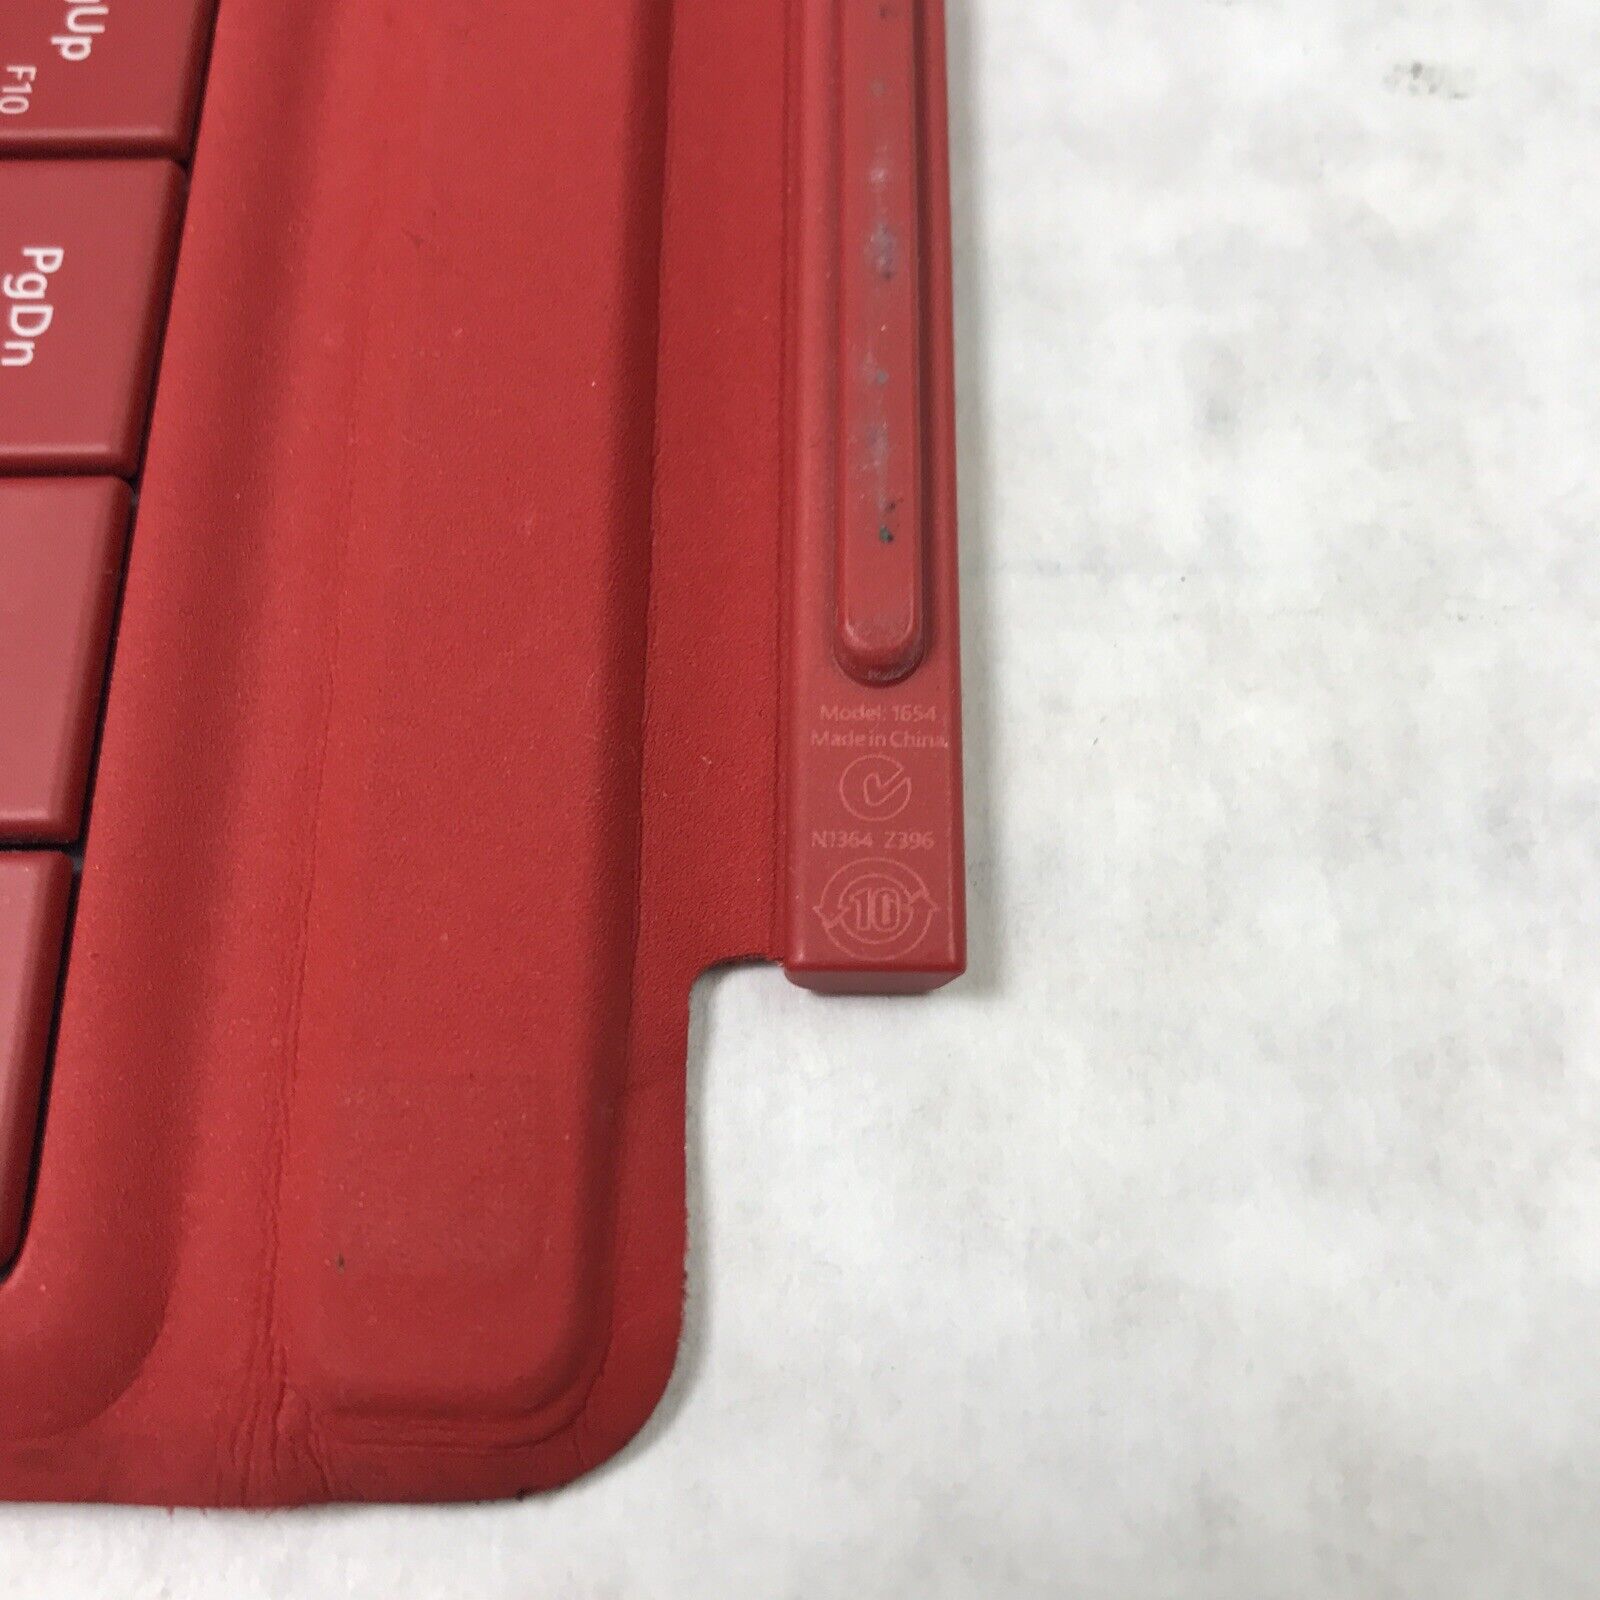 Genuine Microsoft 1654 red detachable keyboard for tablet